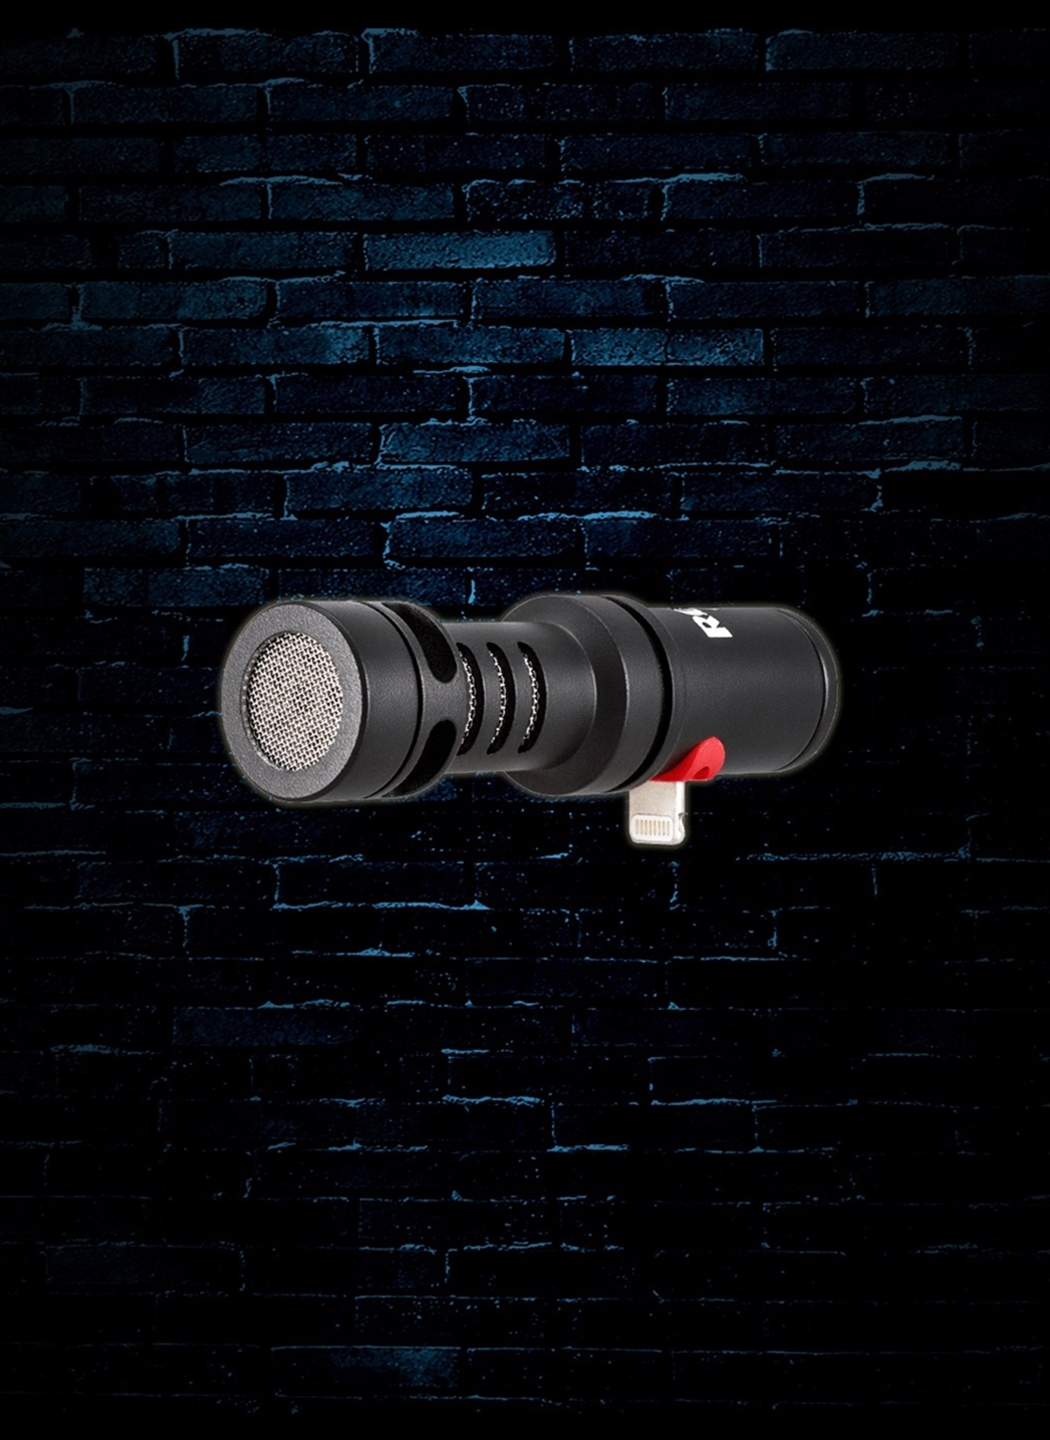 Rode VideoMic Me-L Directional iOS Microphone